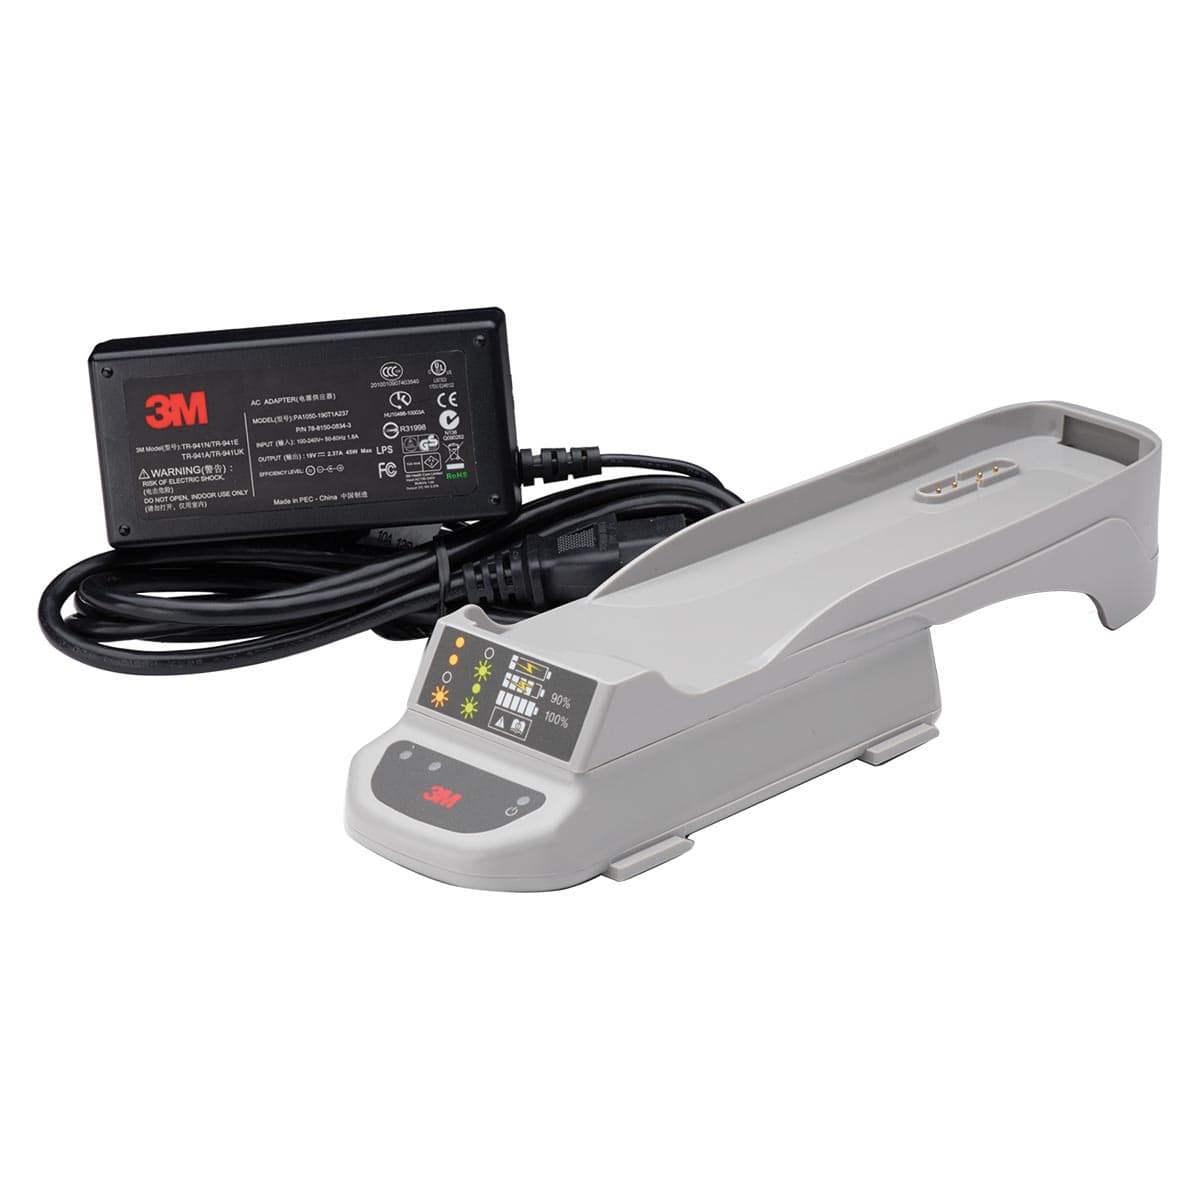 3M™ Versaflo™ Single Station Battery Charger Kit TR-641N/37350 (AAD)